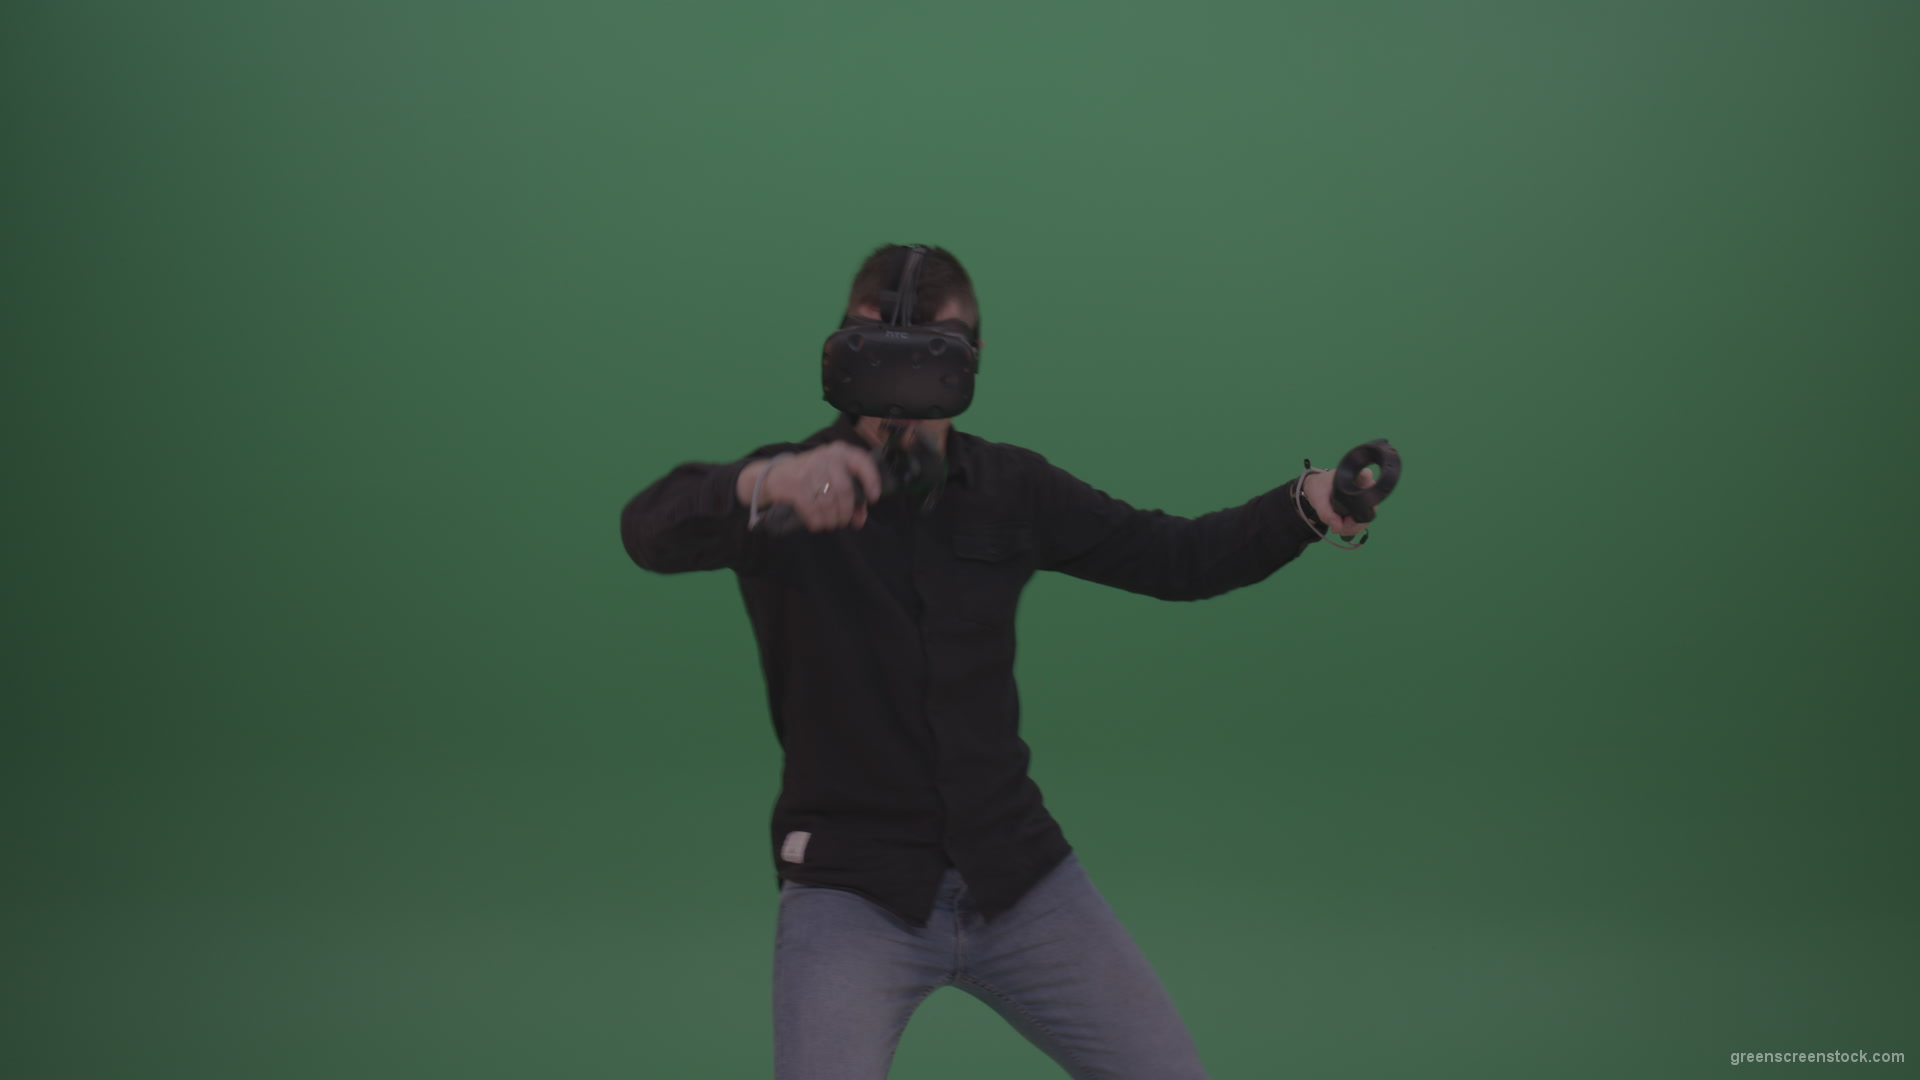 Young_Dangerous_Brunette_Man_Wearing_Black_Shirt_Shooting_Enemies_All_Around_In_Virtual_Reality_Glasses_Green_Screen_Wall_Background_005 Green Screen Stock